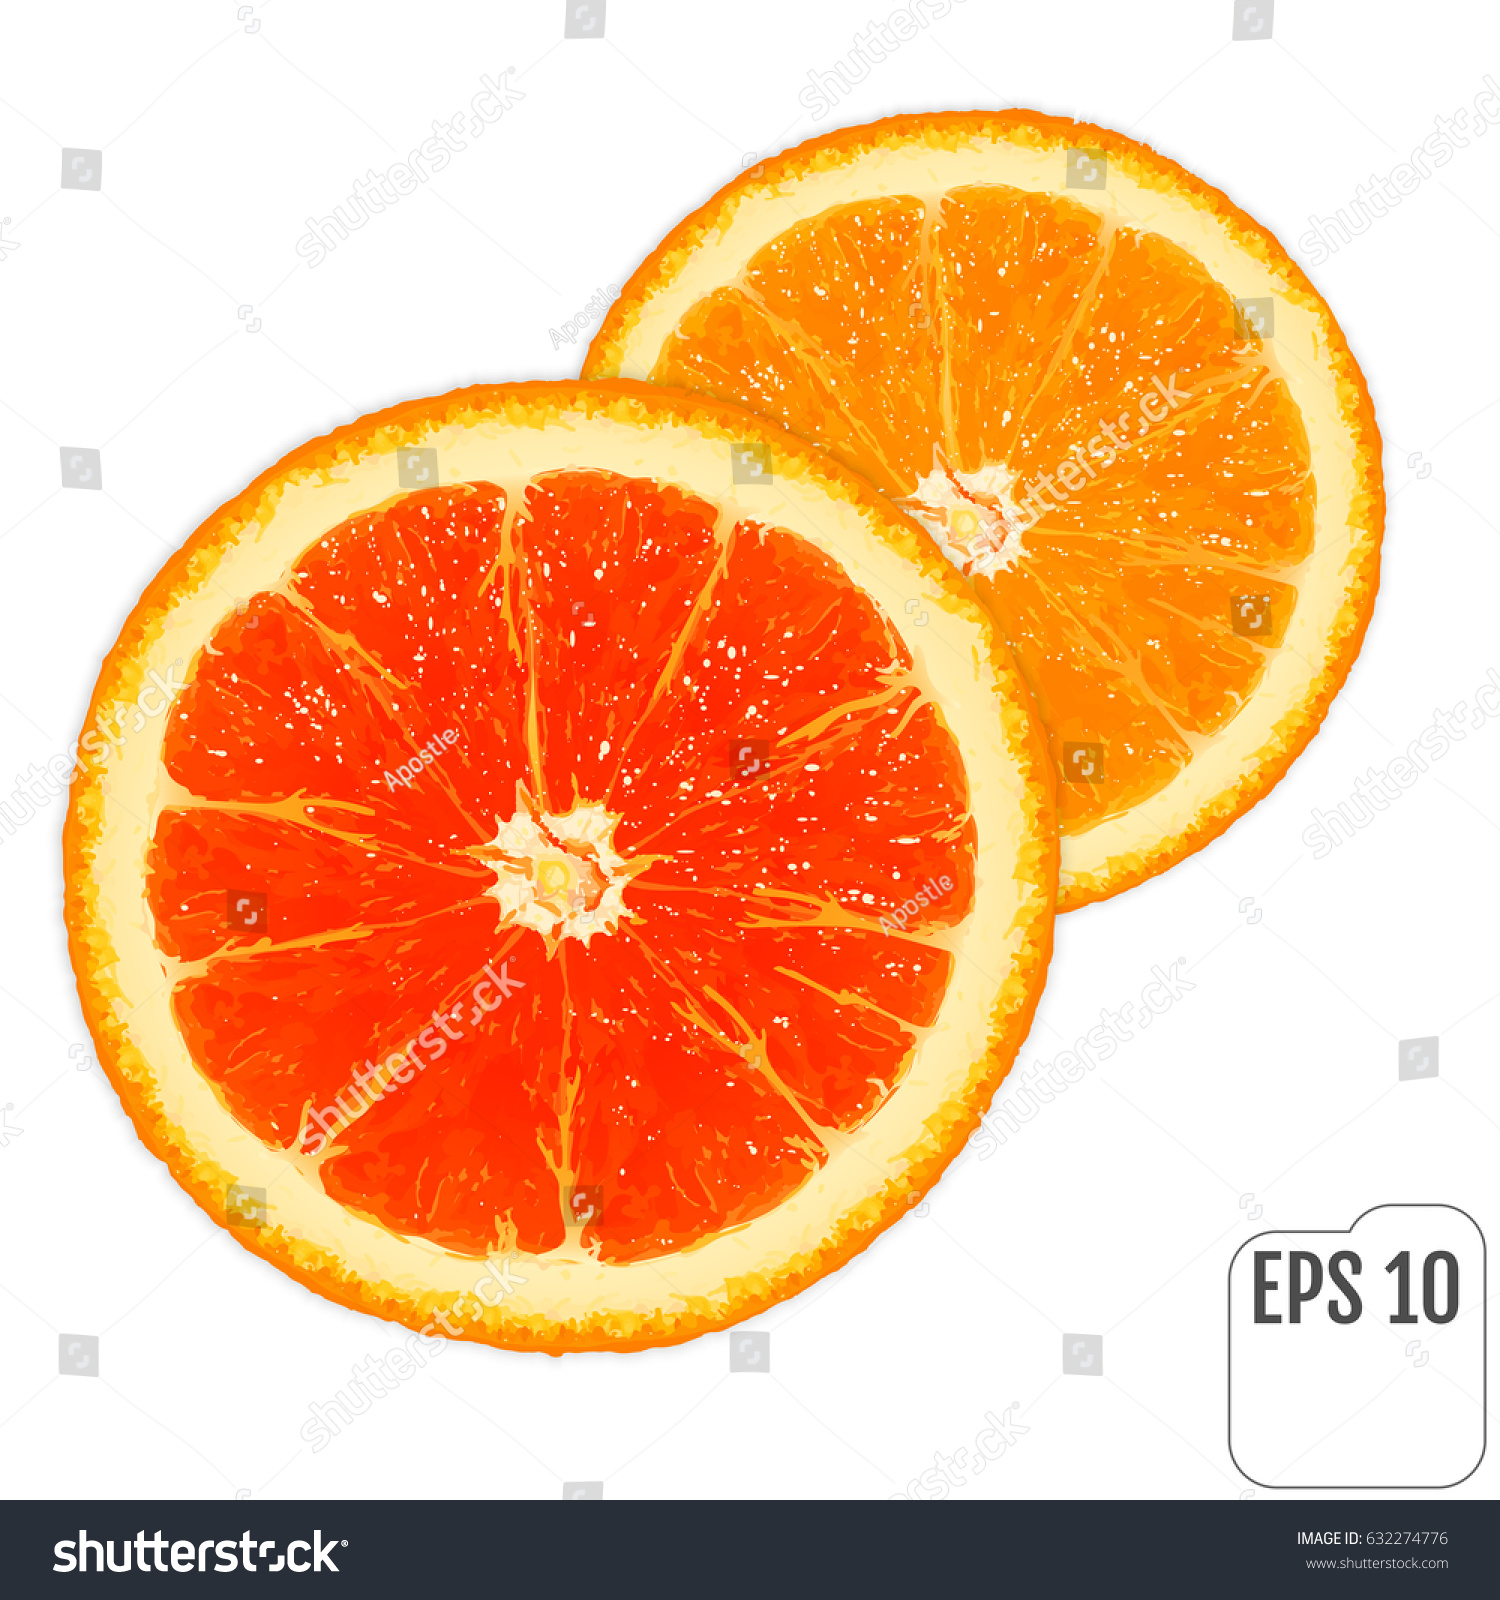 Two Slices Fresh Juicy Oranges On Stock Vector 632274776 - Shutterstock